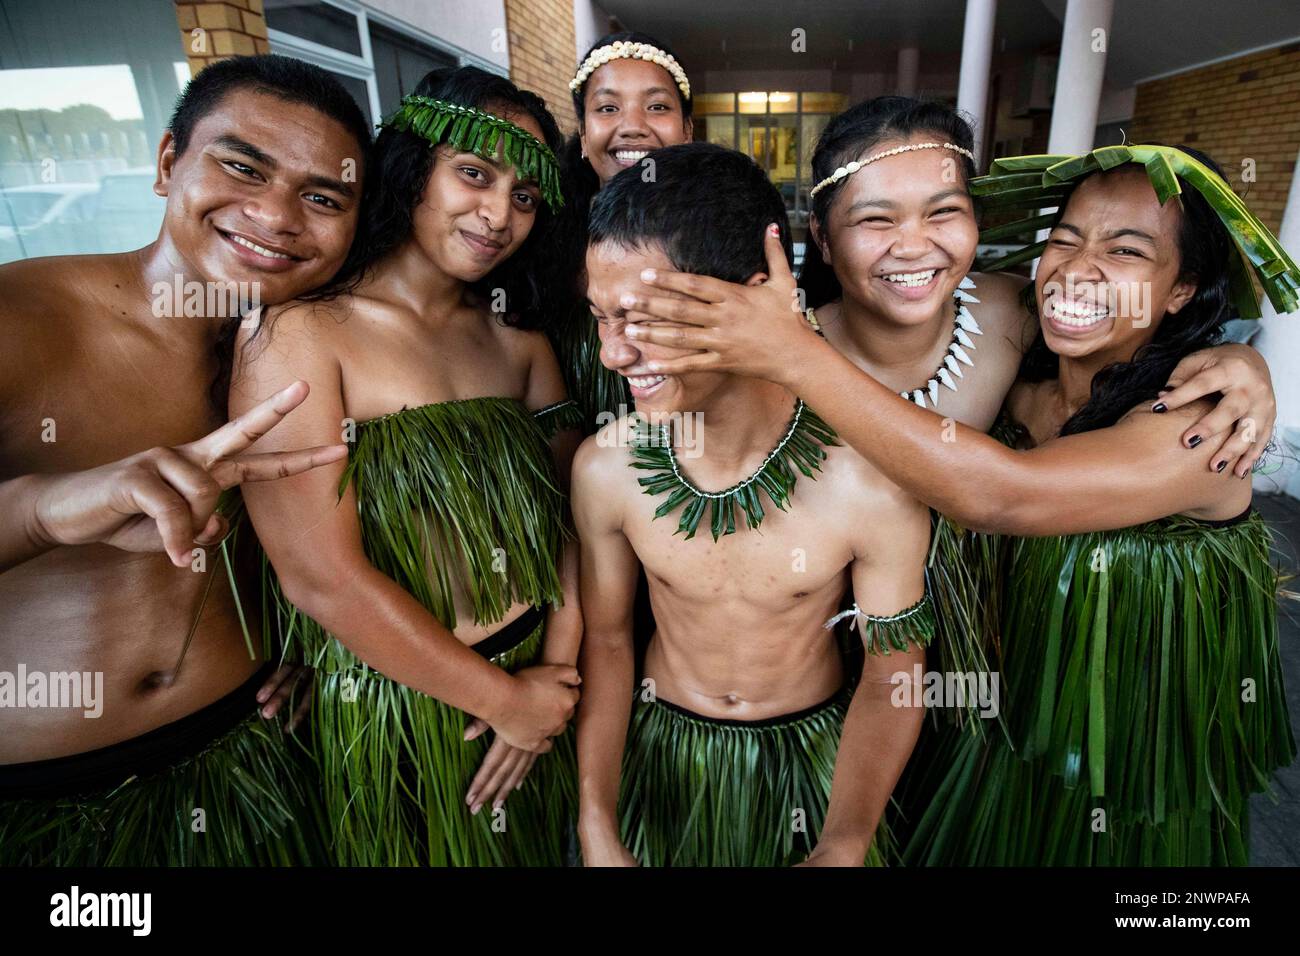 A cultural group from the Nauru Secondary School prepare to perform at the opening ceremony of the Pacific Islands on the tiny Pacific nation of Nauru Monday, Sept. 3, 2018. The Pacific Islands Forum conference starts in Nauru on Monday night. The forum brings together 18 members including Australia and New Zealand to discuss regional issues. (Jason Oxenham/Pool Photo via AP) Stockfoto